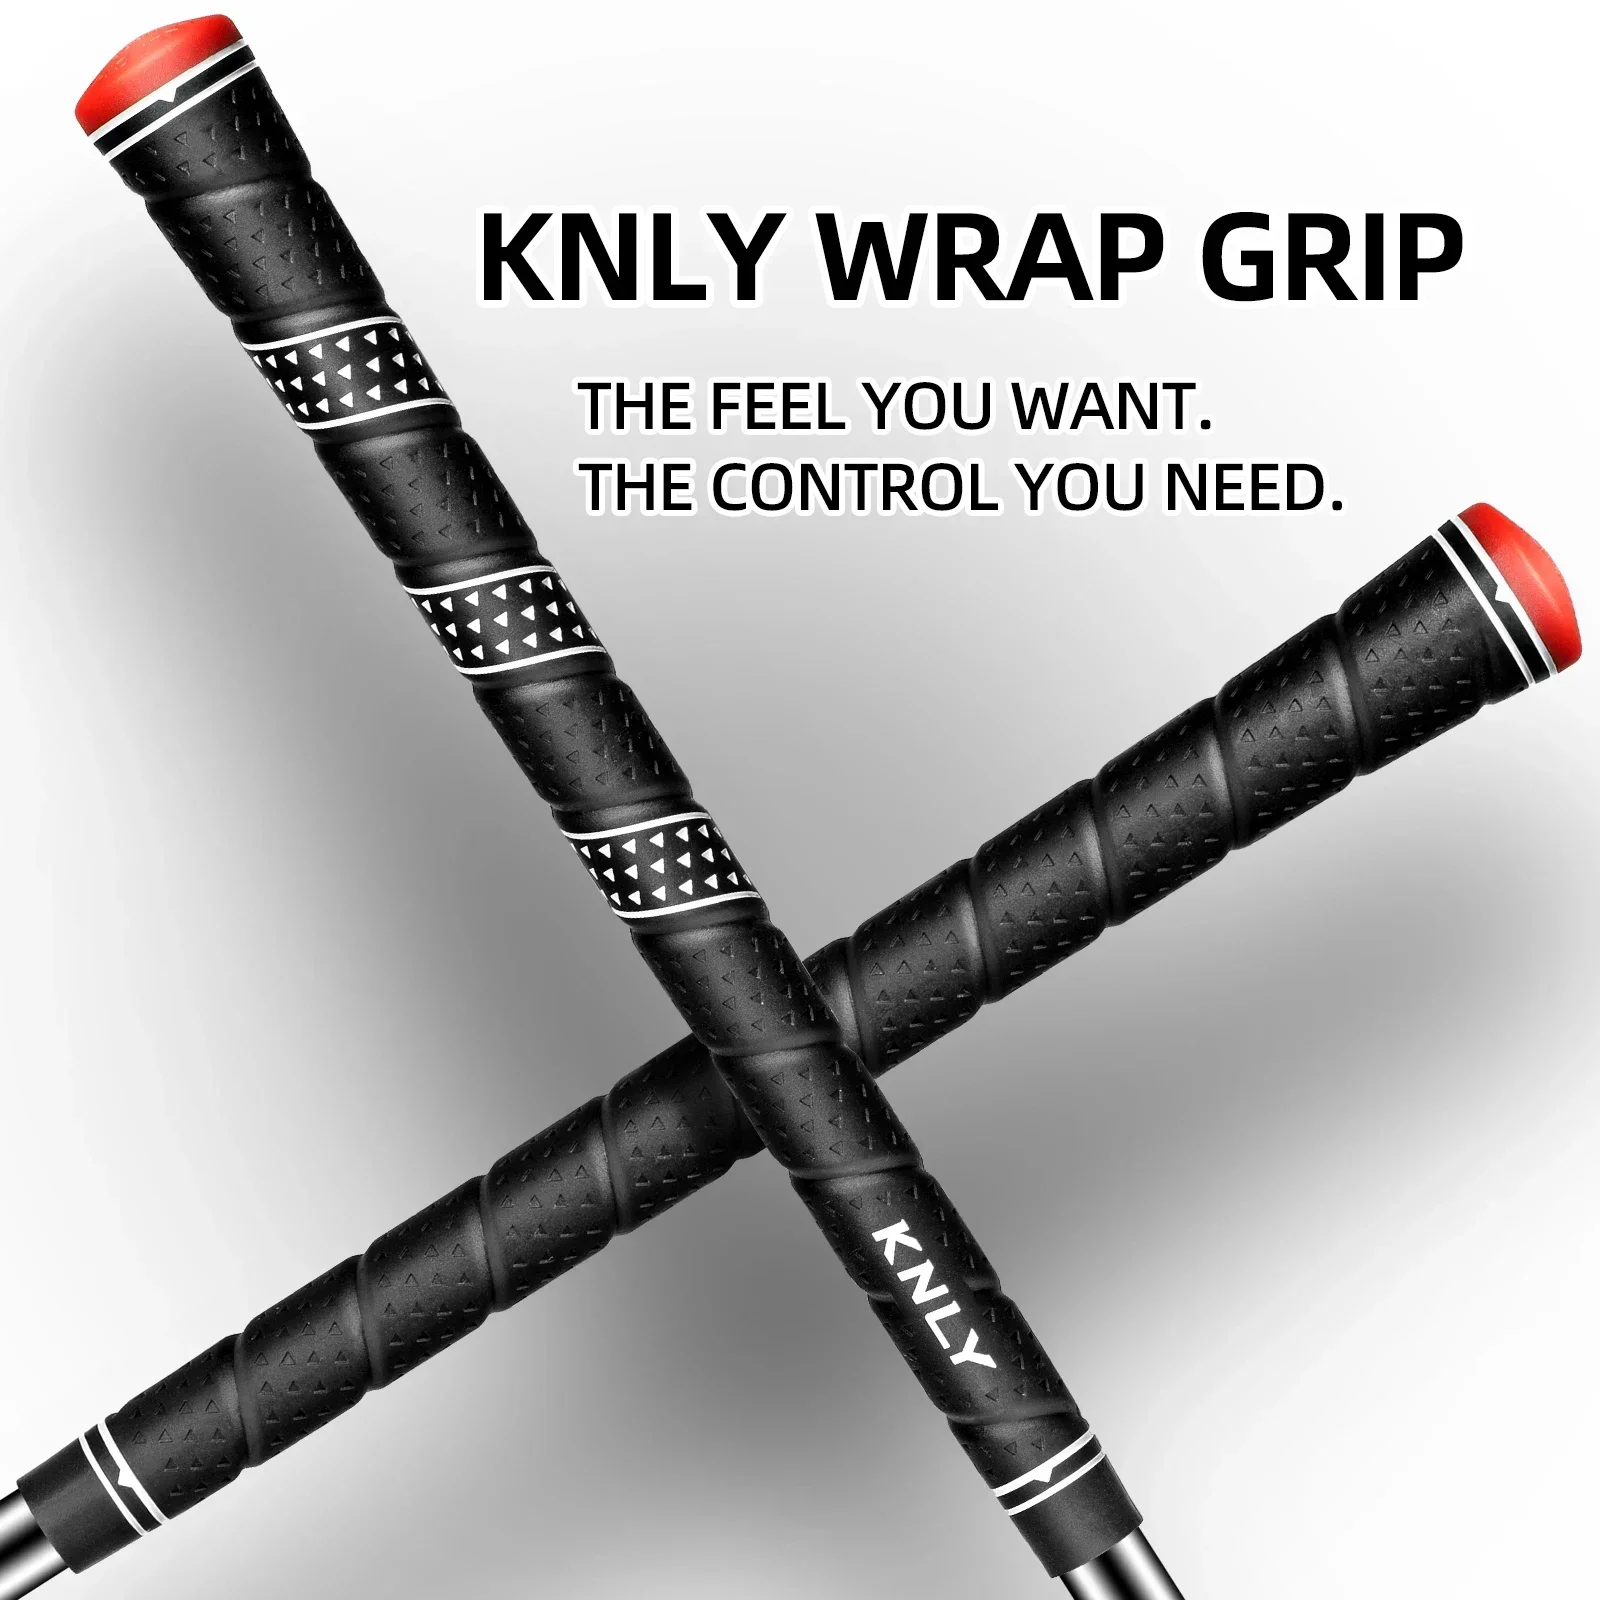 

KNLY High Quality Golf Grips 13pcs/lot Golf Grip Kit Tpe Material Soft Feel Golf Club Grip Swing Handle Light Weight grips